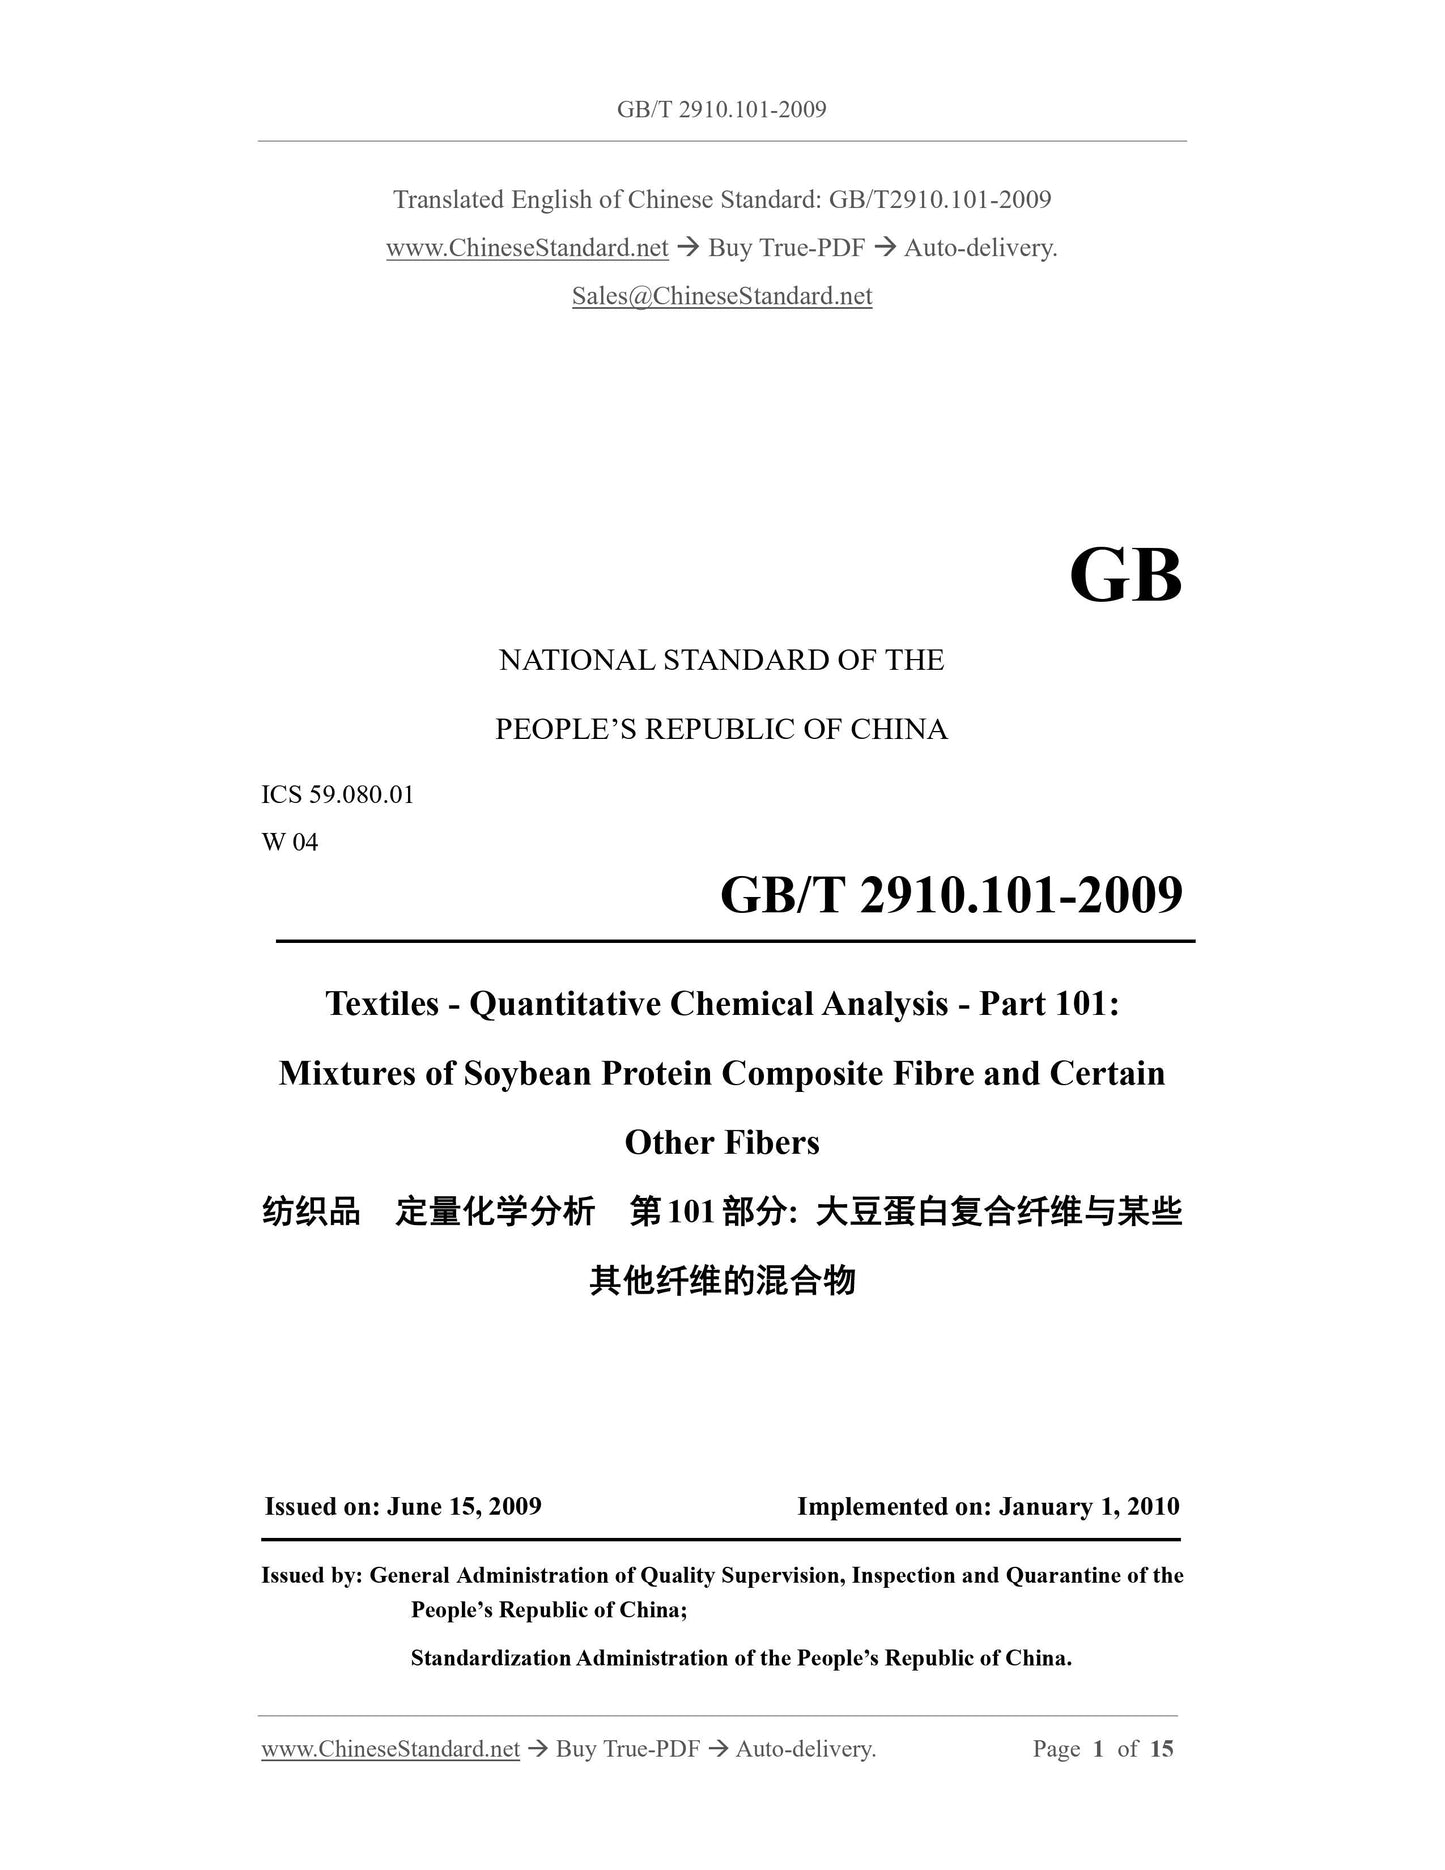 GB/T 2910.101-2009 Page 1